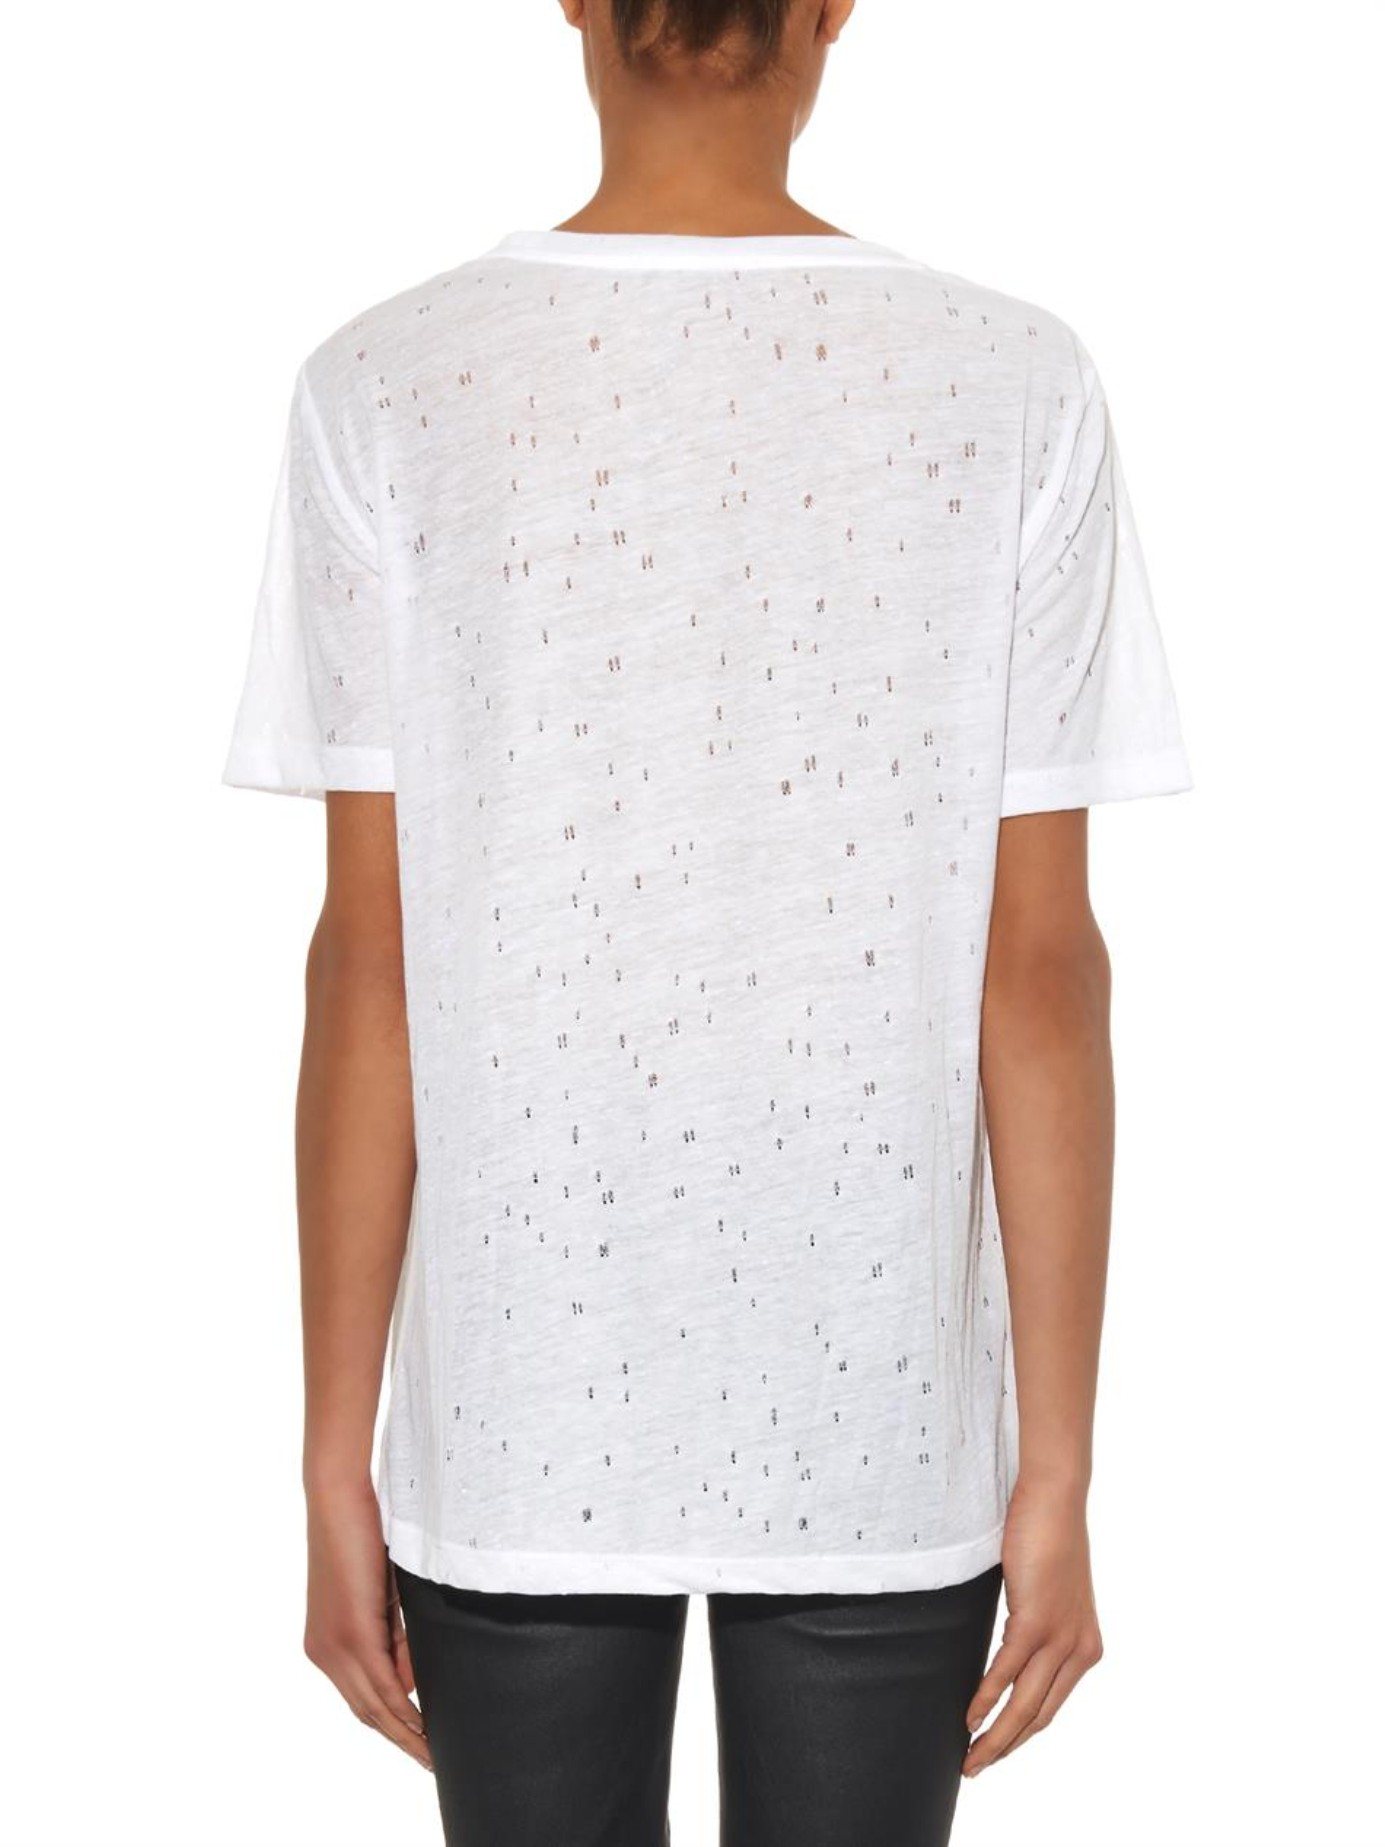 T By Alexander Wang Distressed Jersey T-shirt in Ivory (White) - Lyst